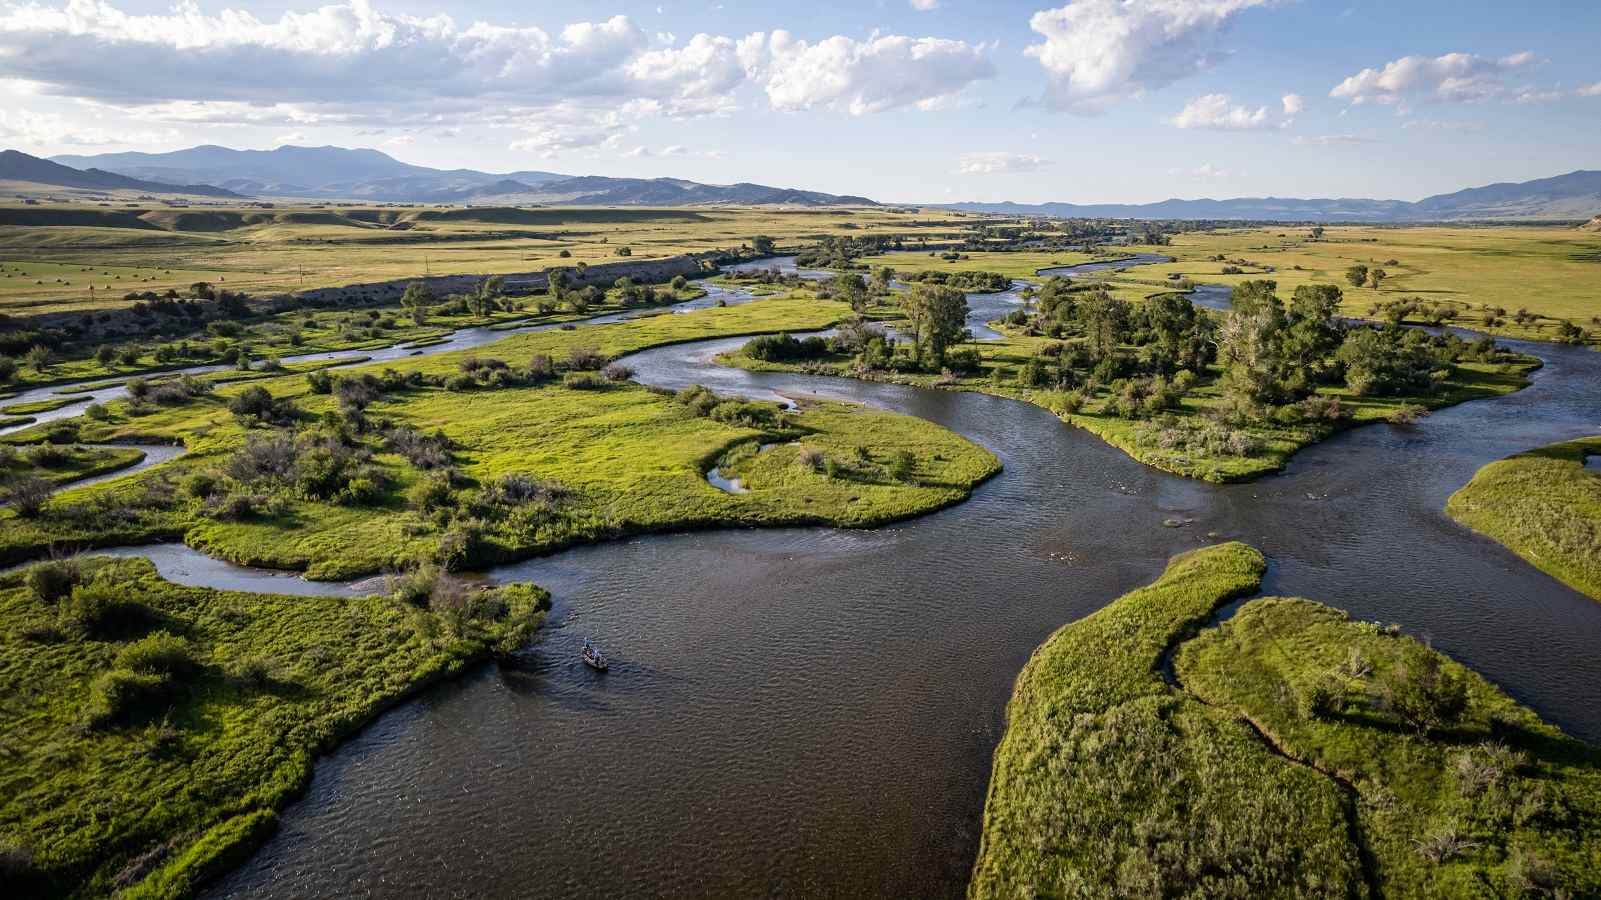 A winding river in Montana with smaller tributaries surrounded by lush green grass and mountains in the background.